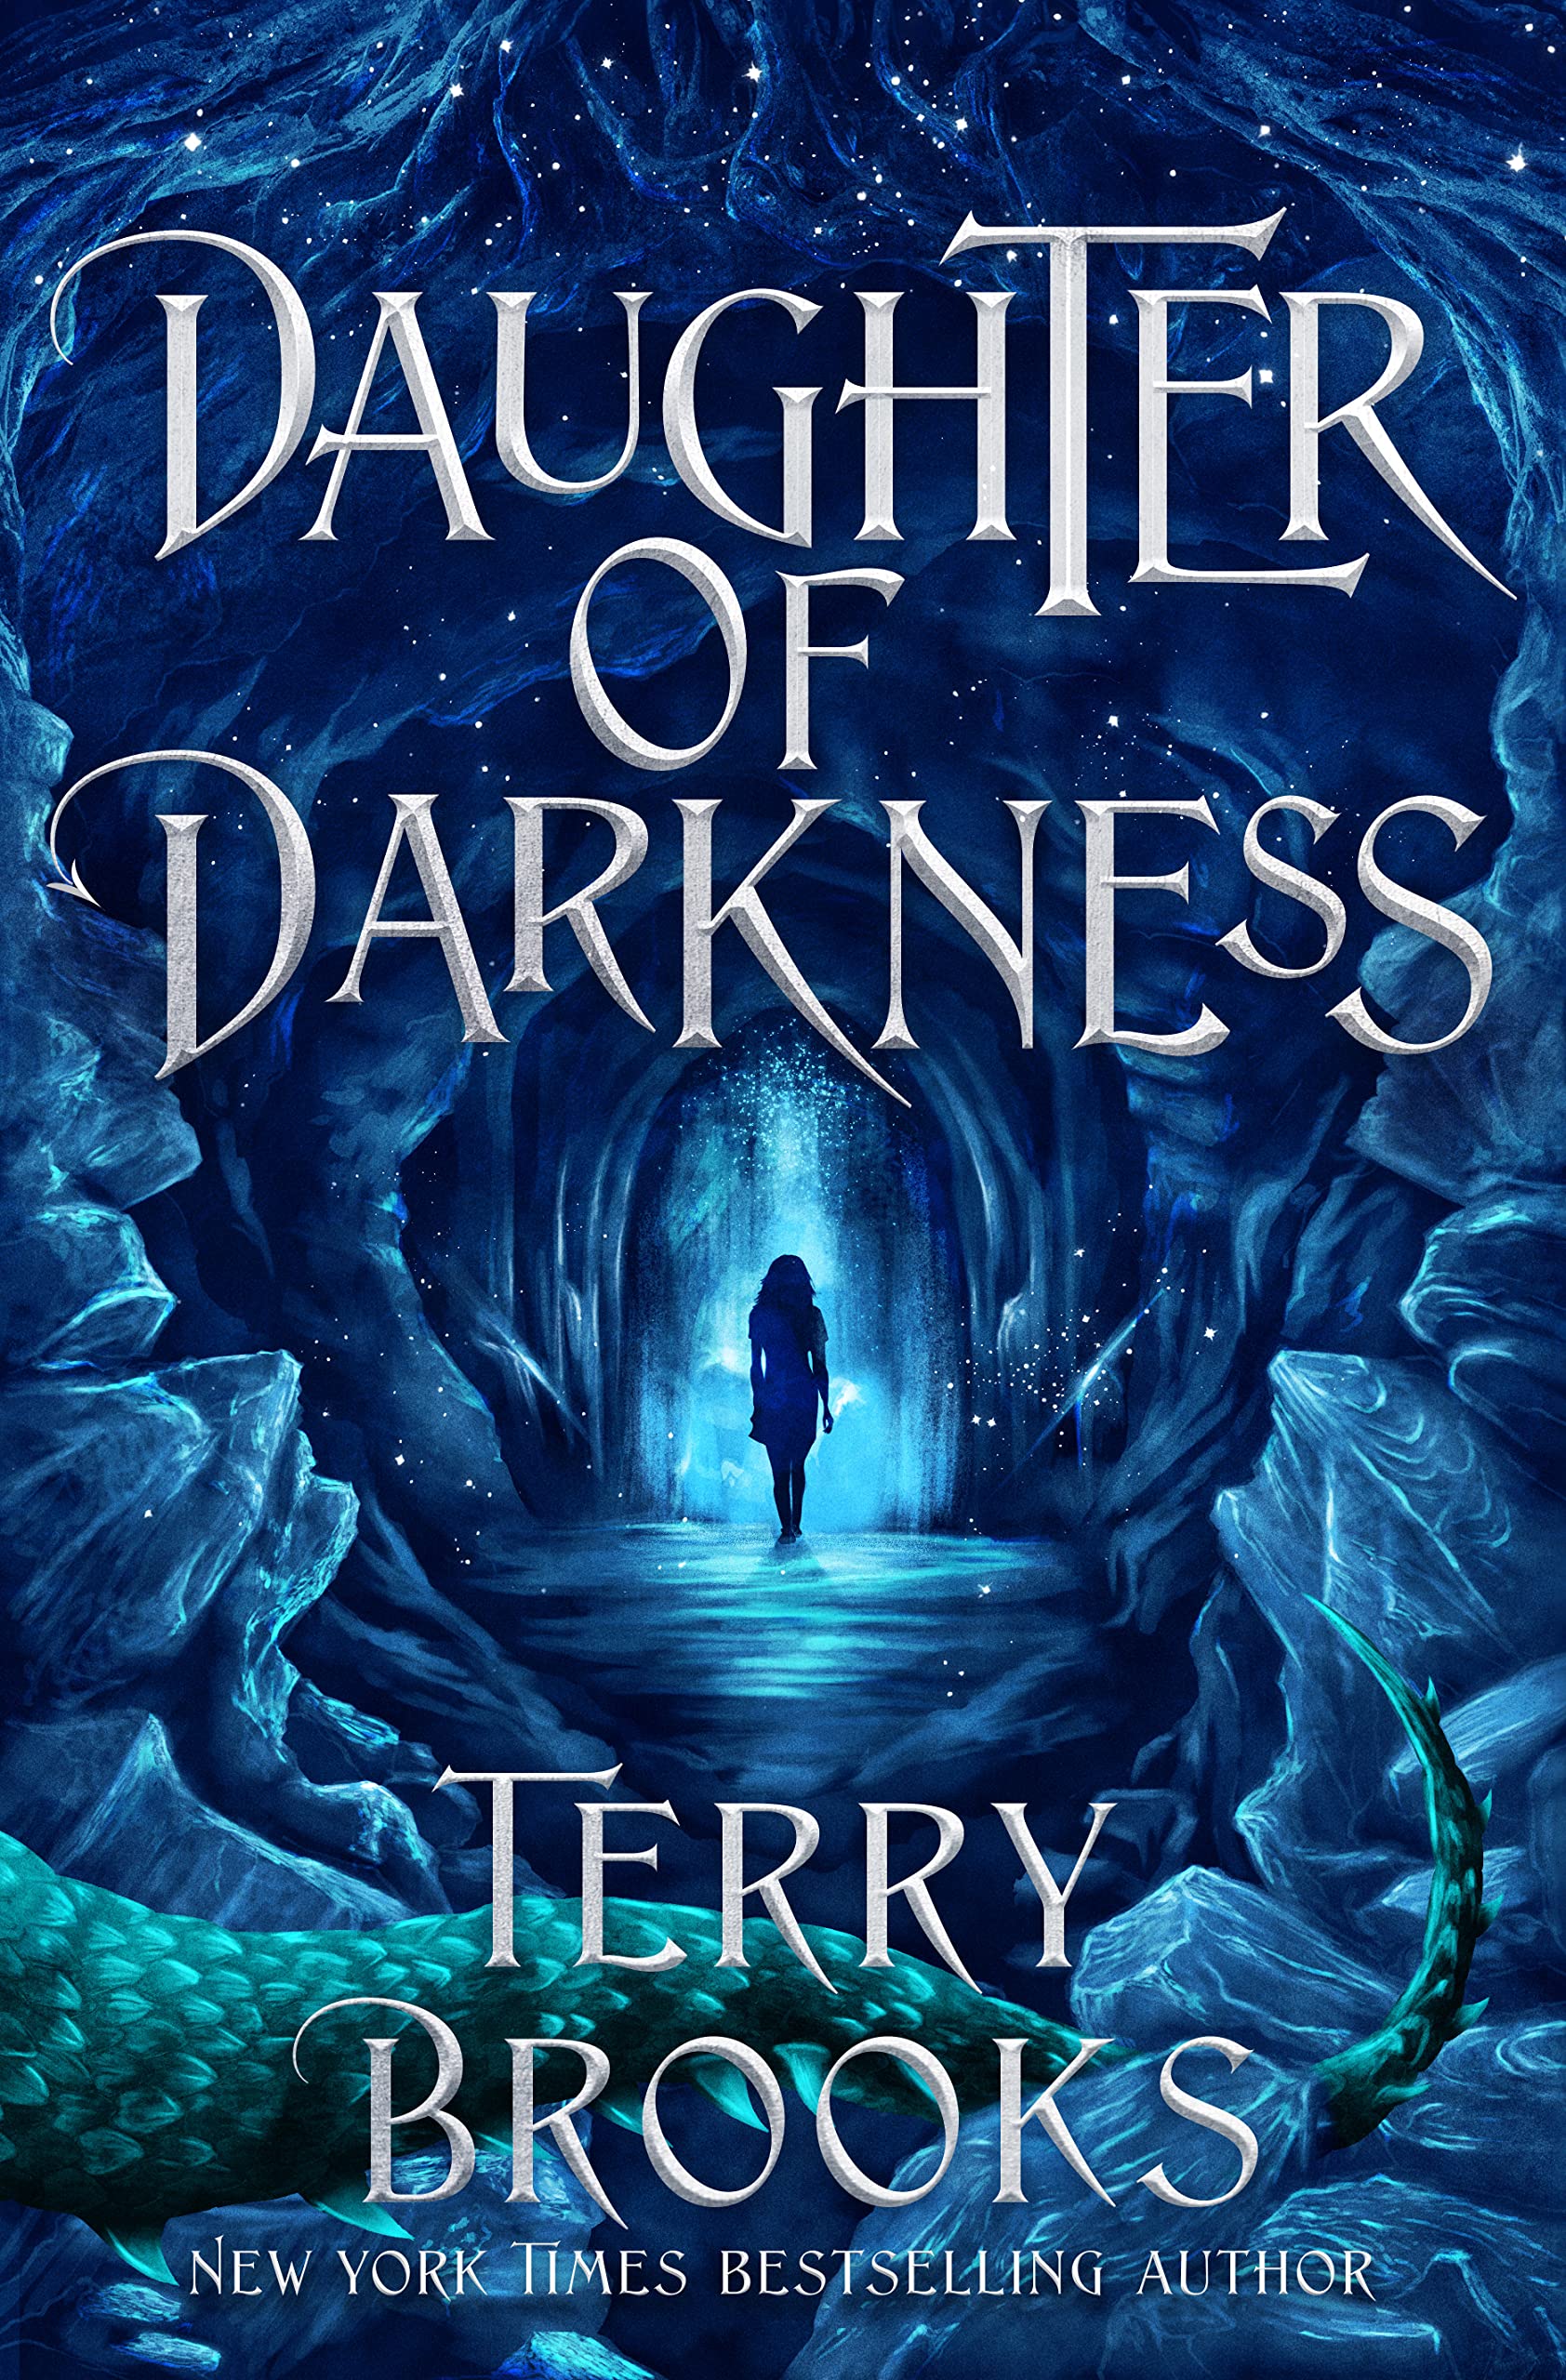 In-Person Event with Terry Brooks/Daughter of Darkness